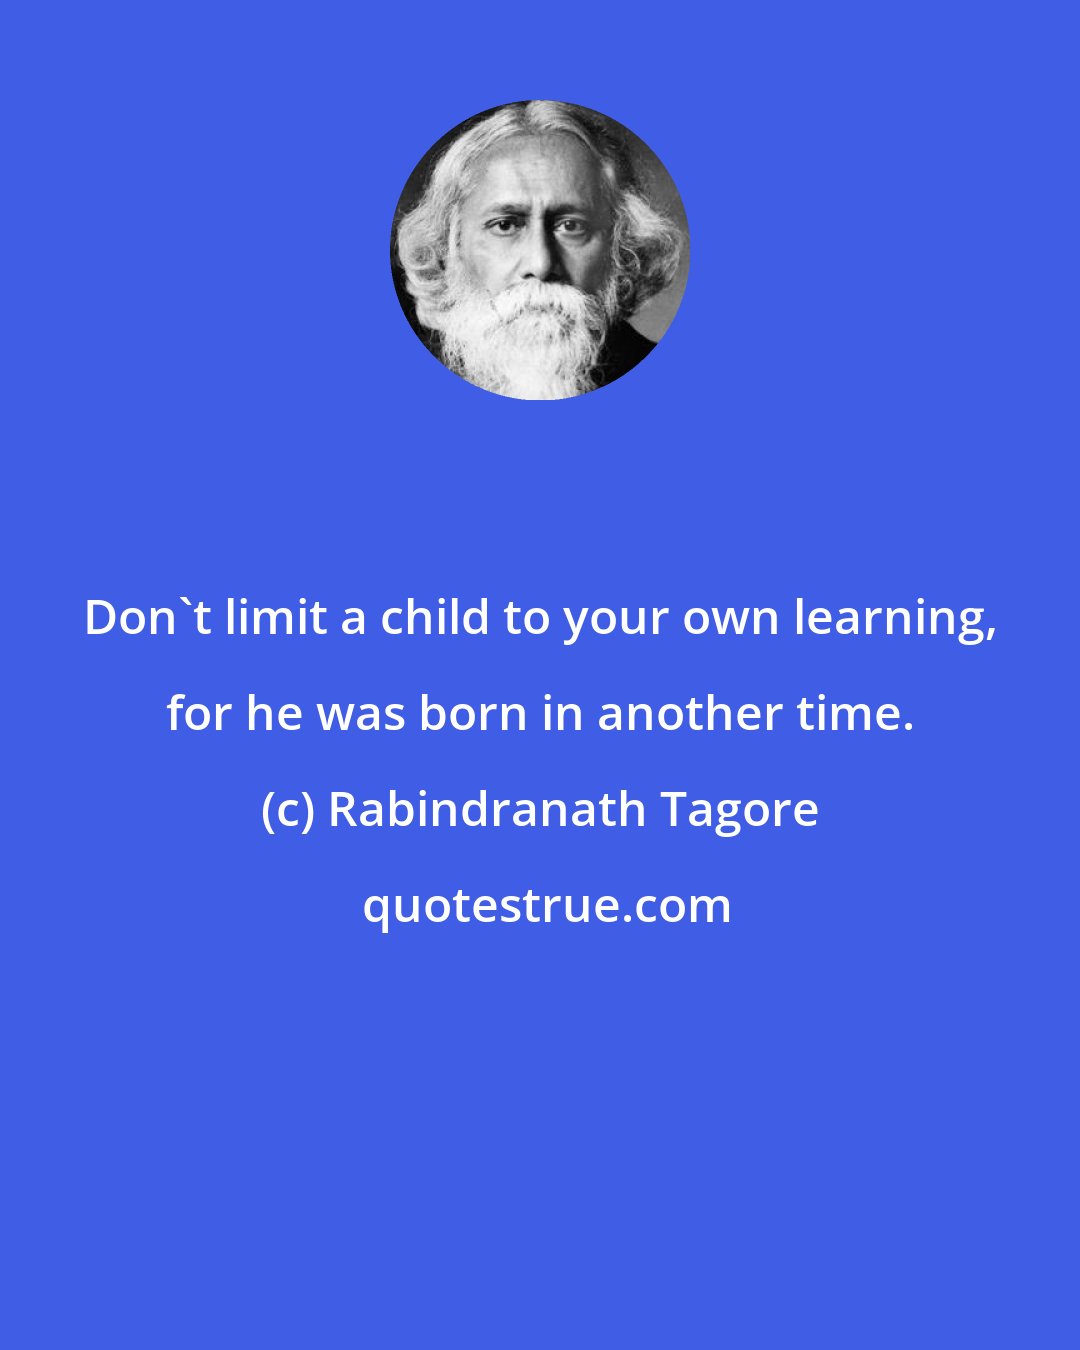 Rabindranath Tagore: Don't limit a child to your own learning, for he was born in another time.